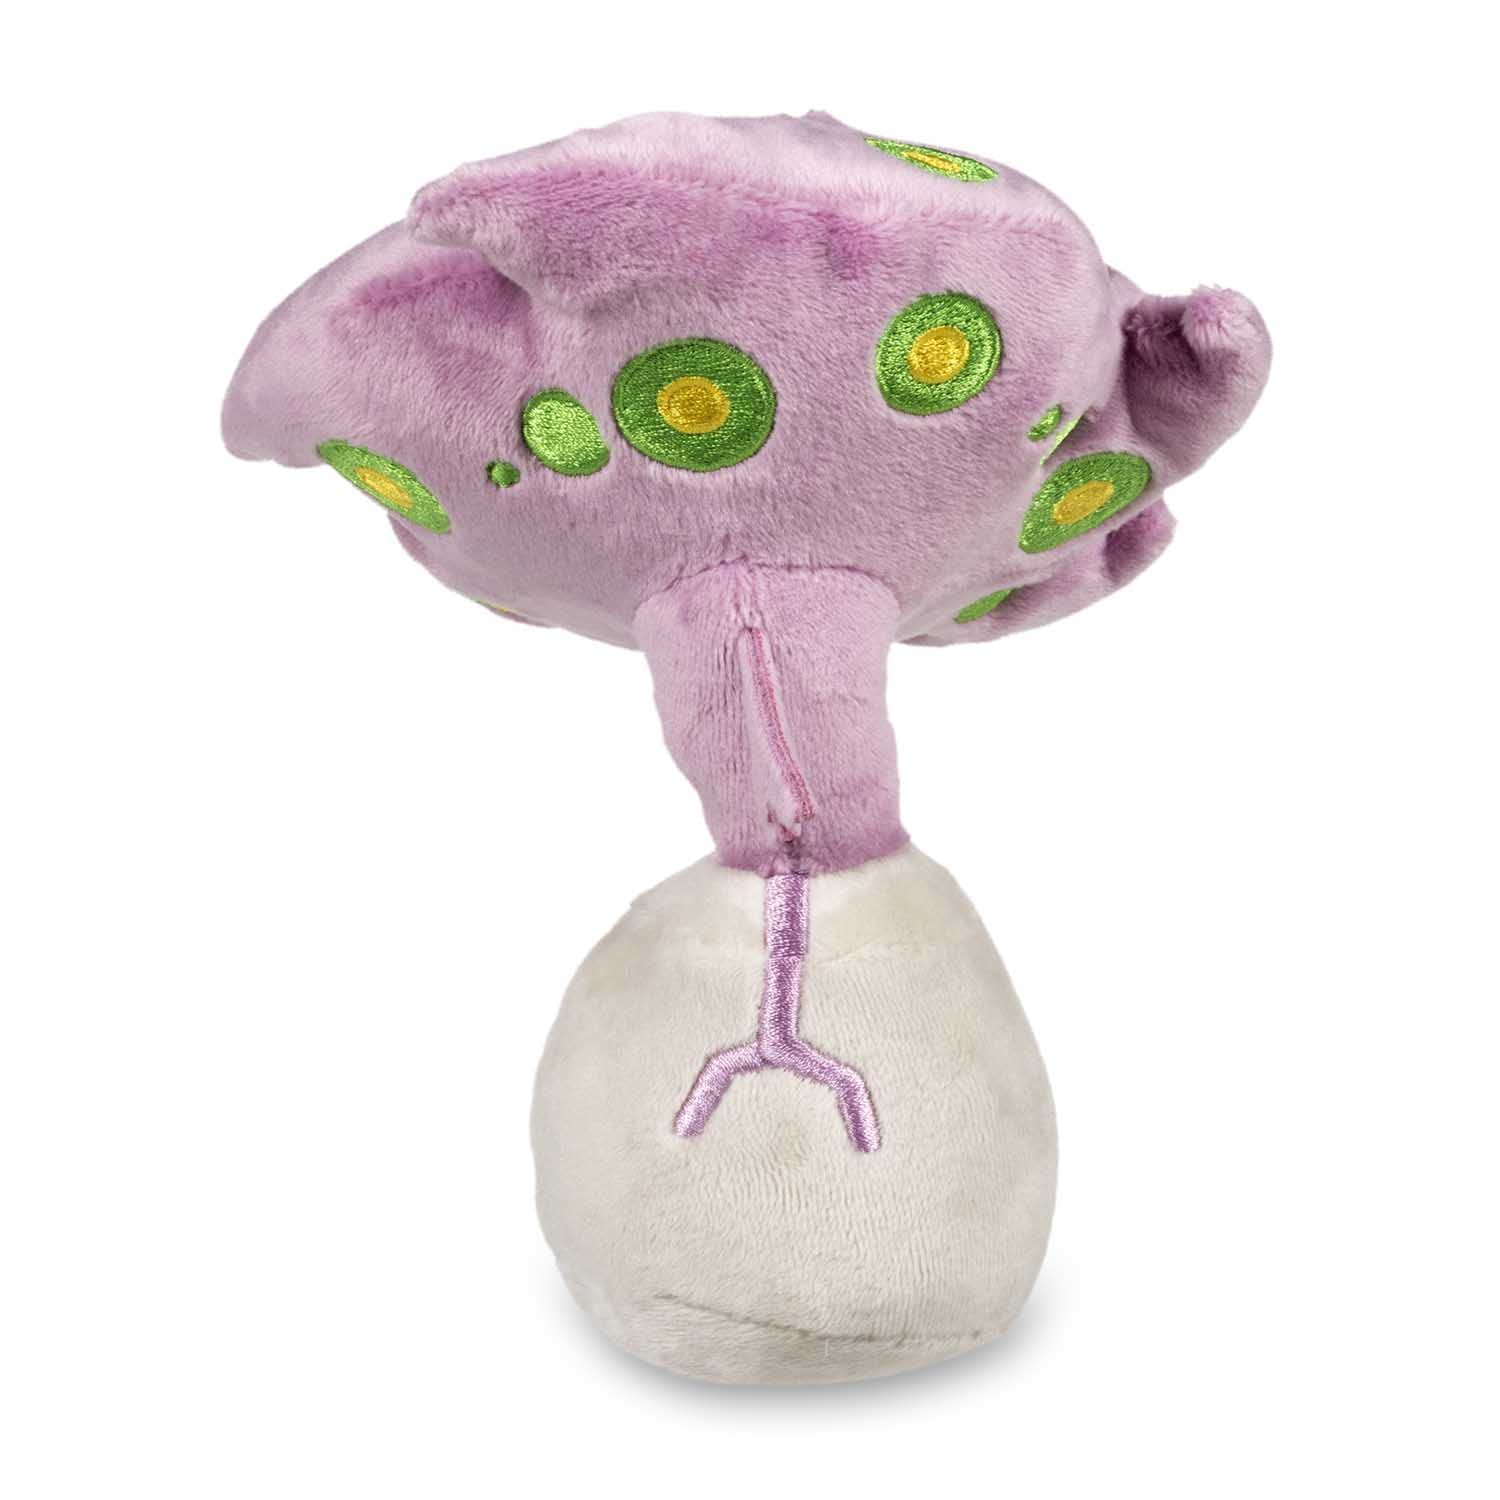 Affordable spiritomb For Sale, Toys & Games